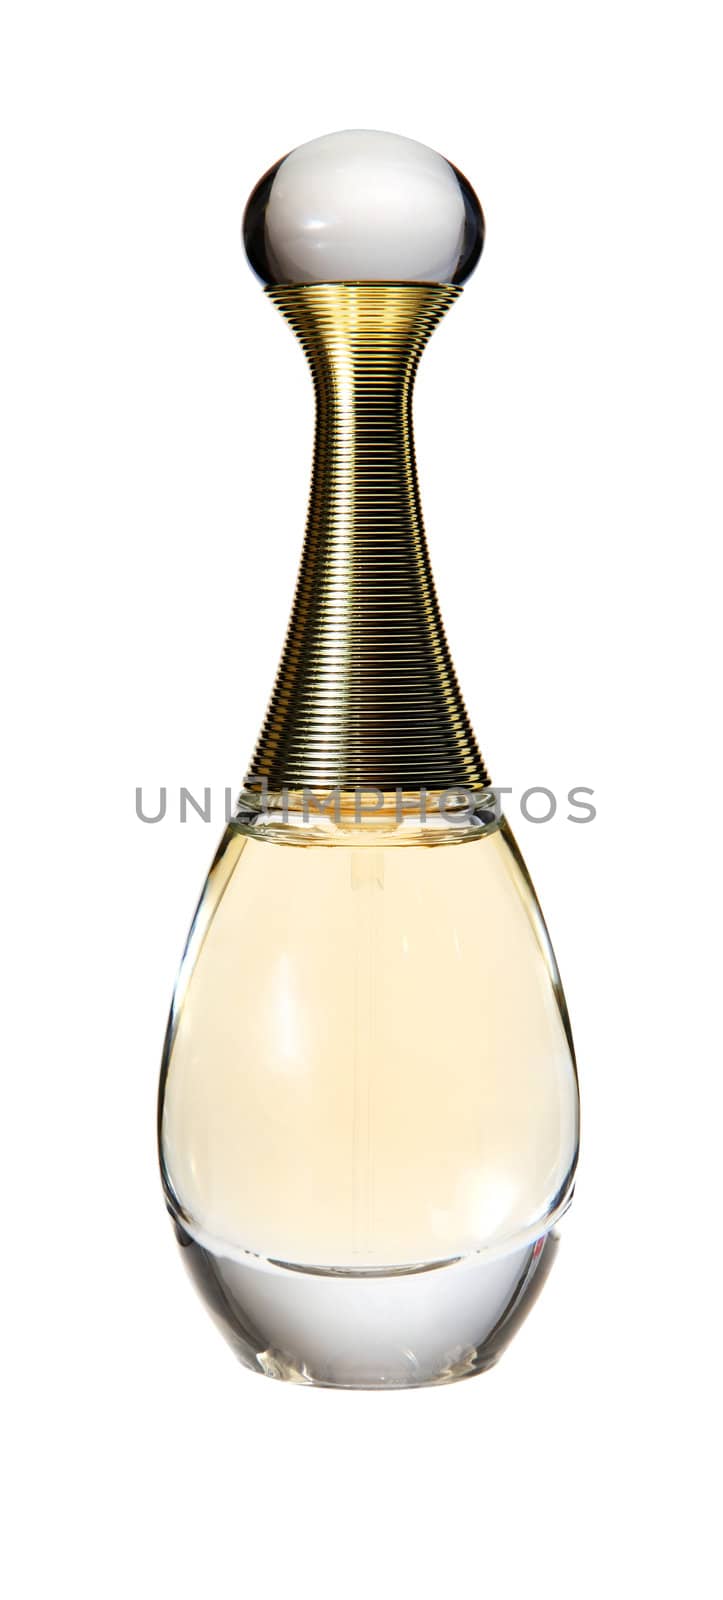 A perfume bottle on the white background
